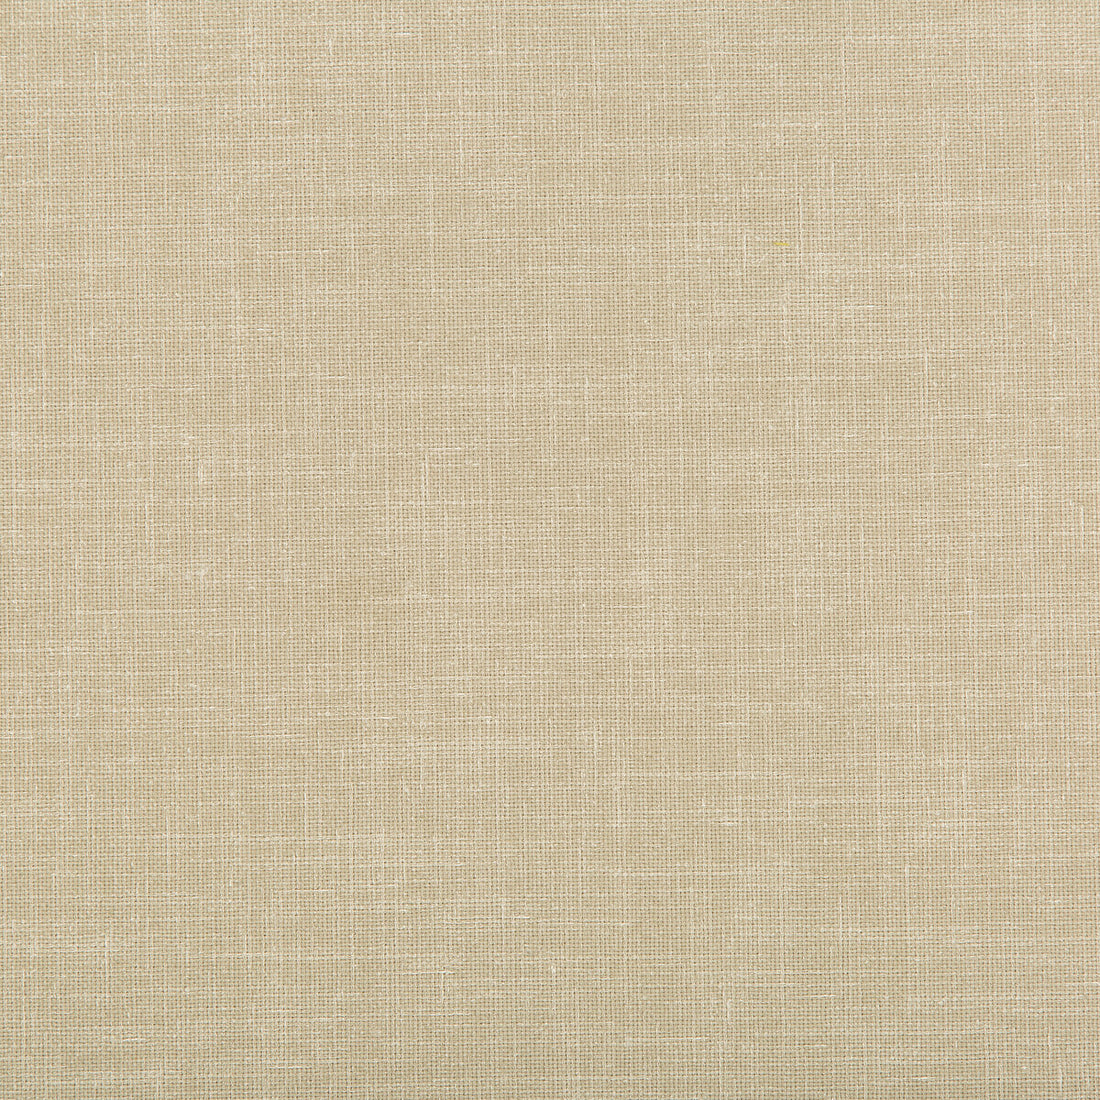 Kravet Contract fabric in 4639-16 color - pattern 4639.16.0 - by Kravet Contract